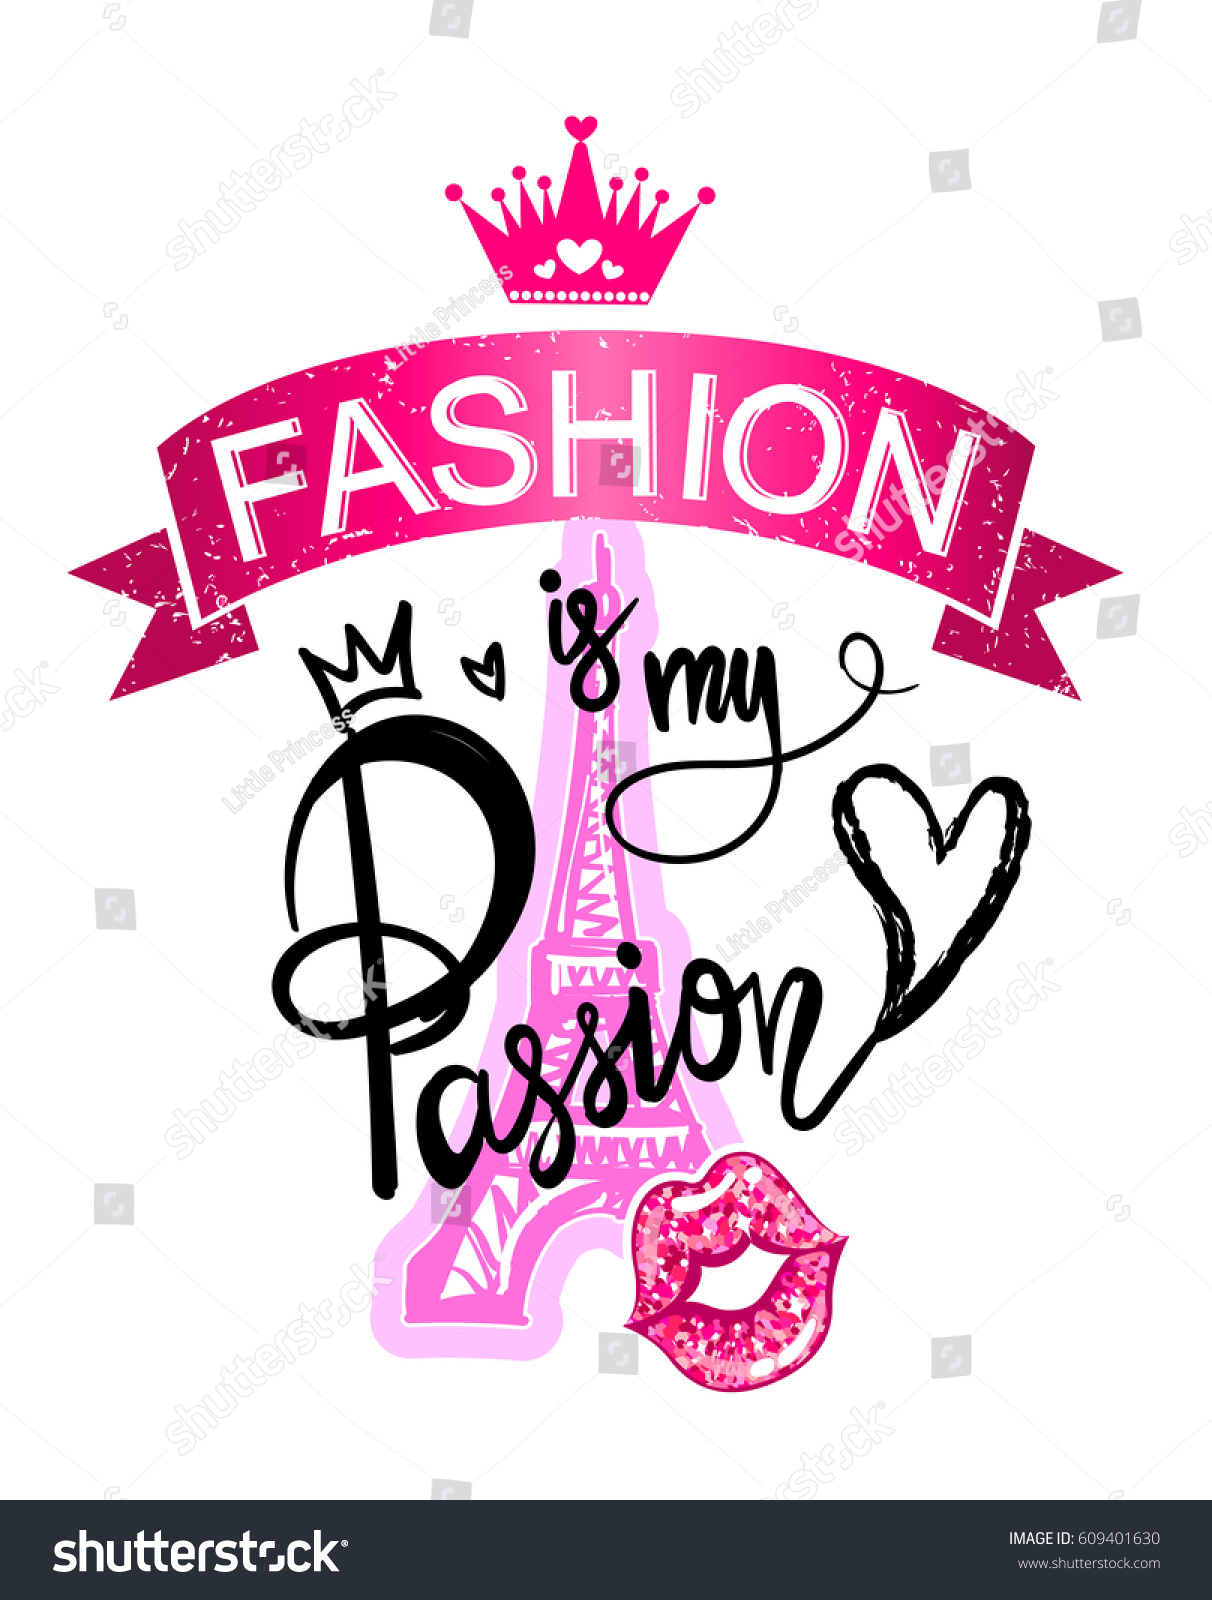 Fashion My Passion Girlish Fancy Design Stock Vector 609401630 ...